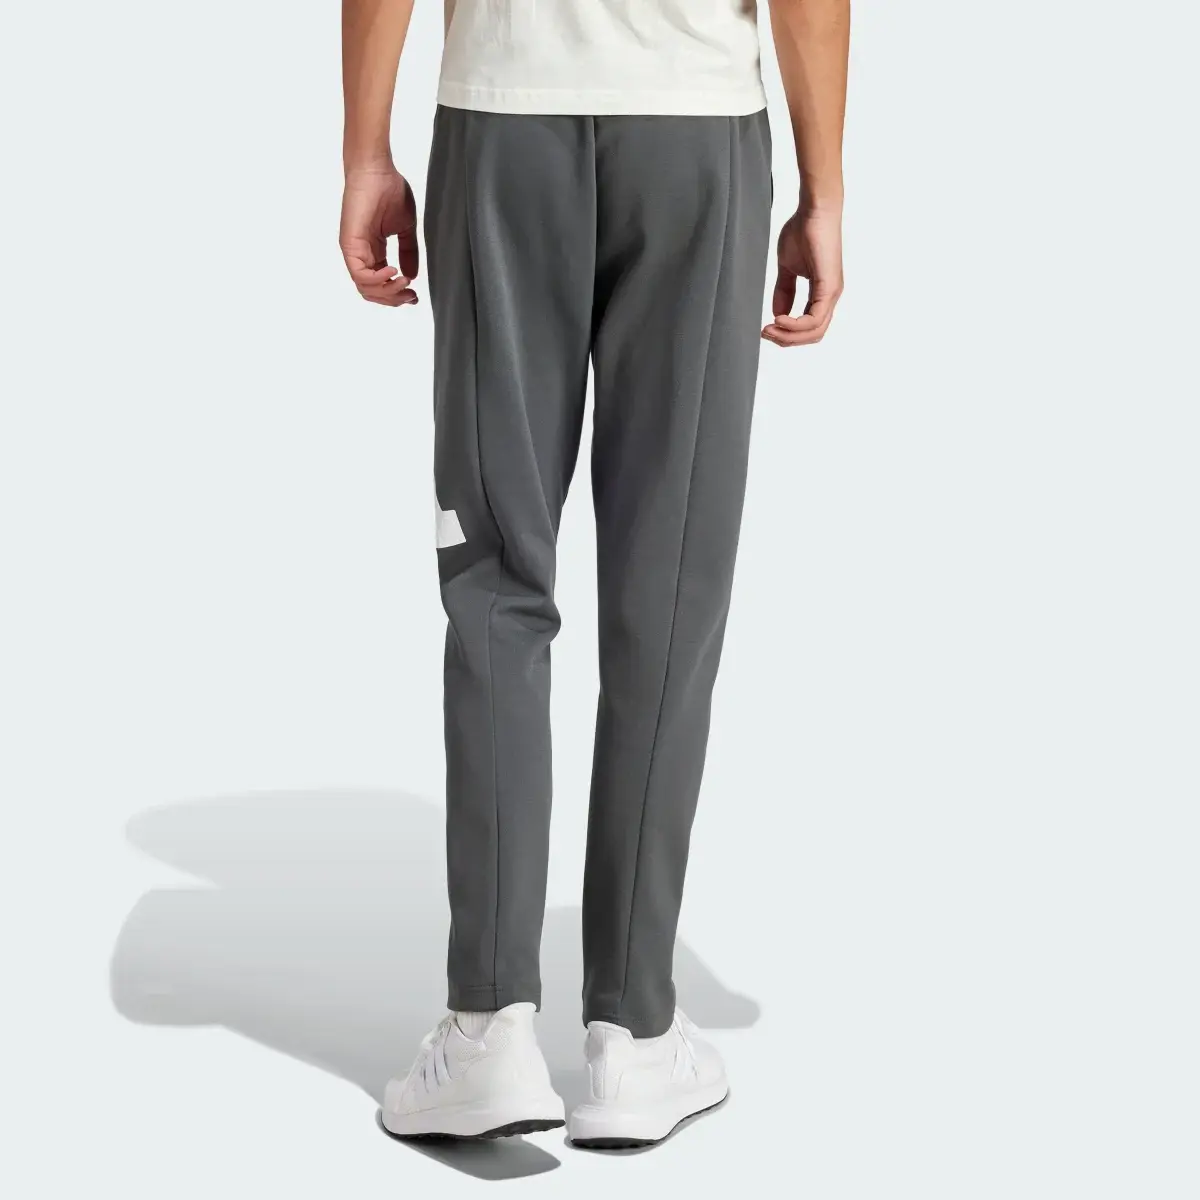 Adidas Future Icons Badge of Sport Joggers. 3